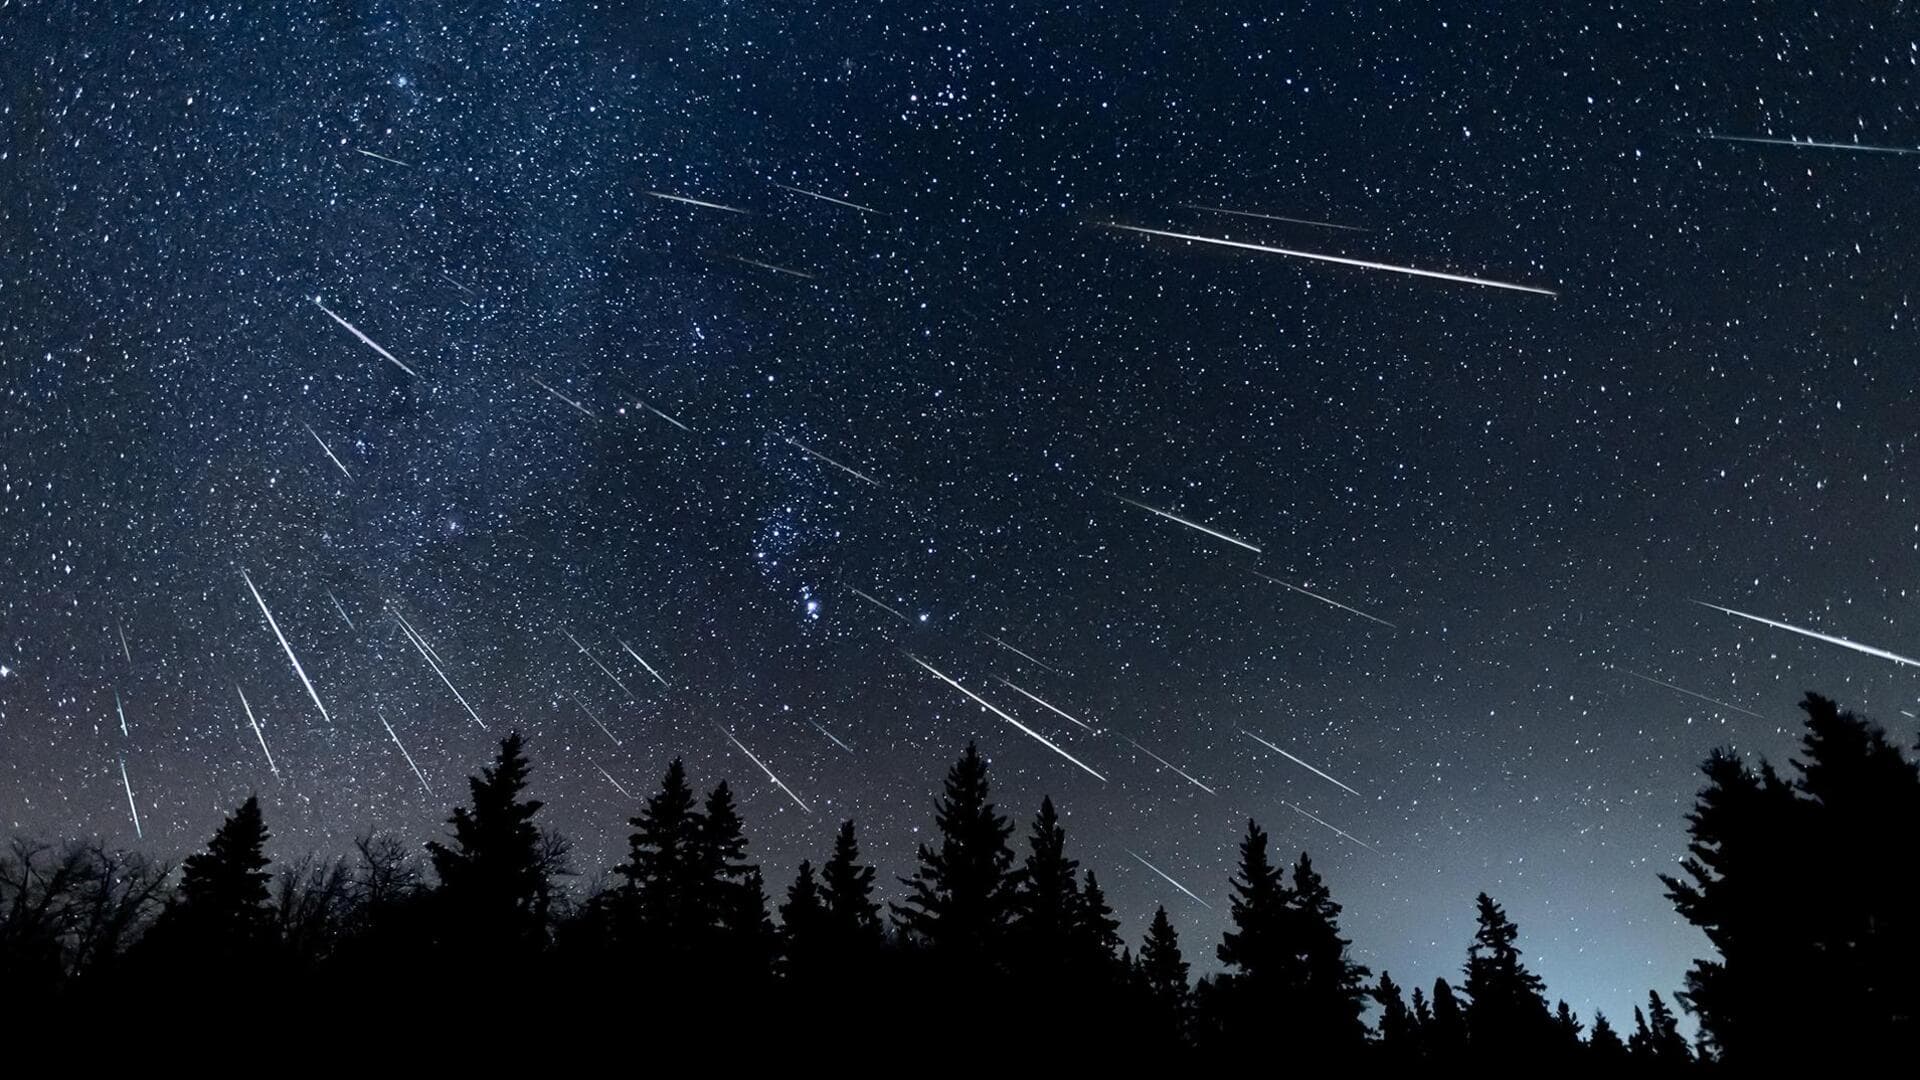 Taurid meteor shower in November: When and how to watch